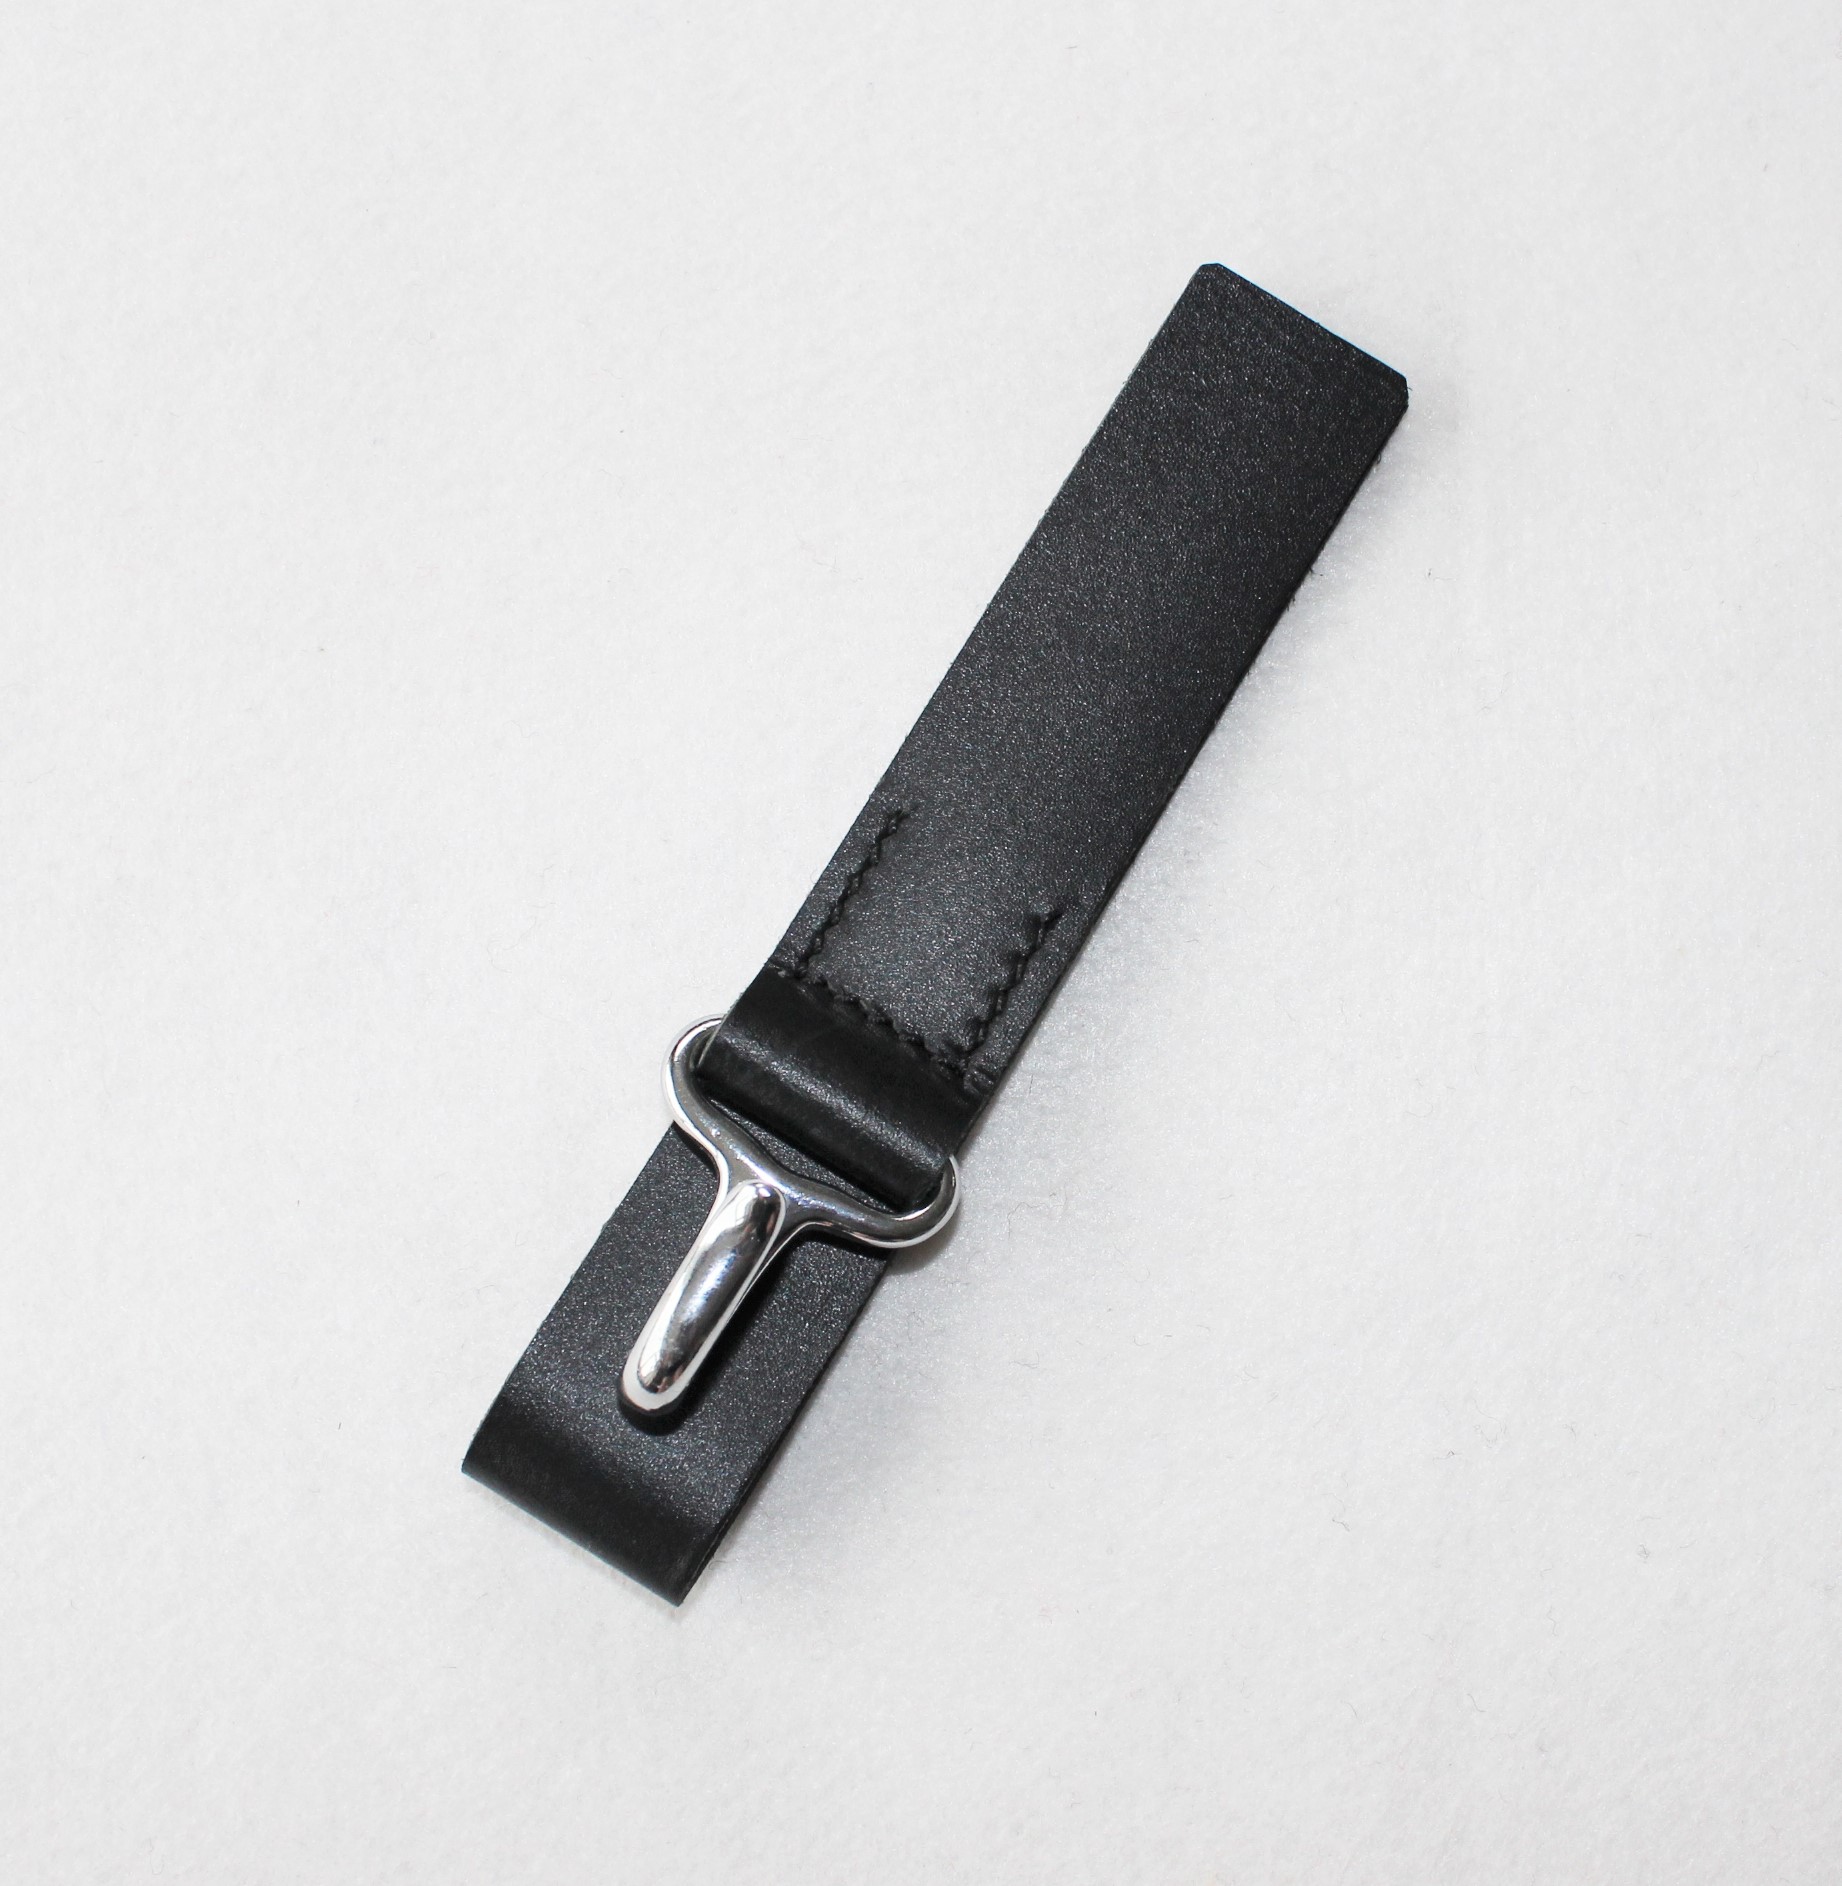 Bass Drum Hook on Black Leather Strap - The Marching Band Shop